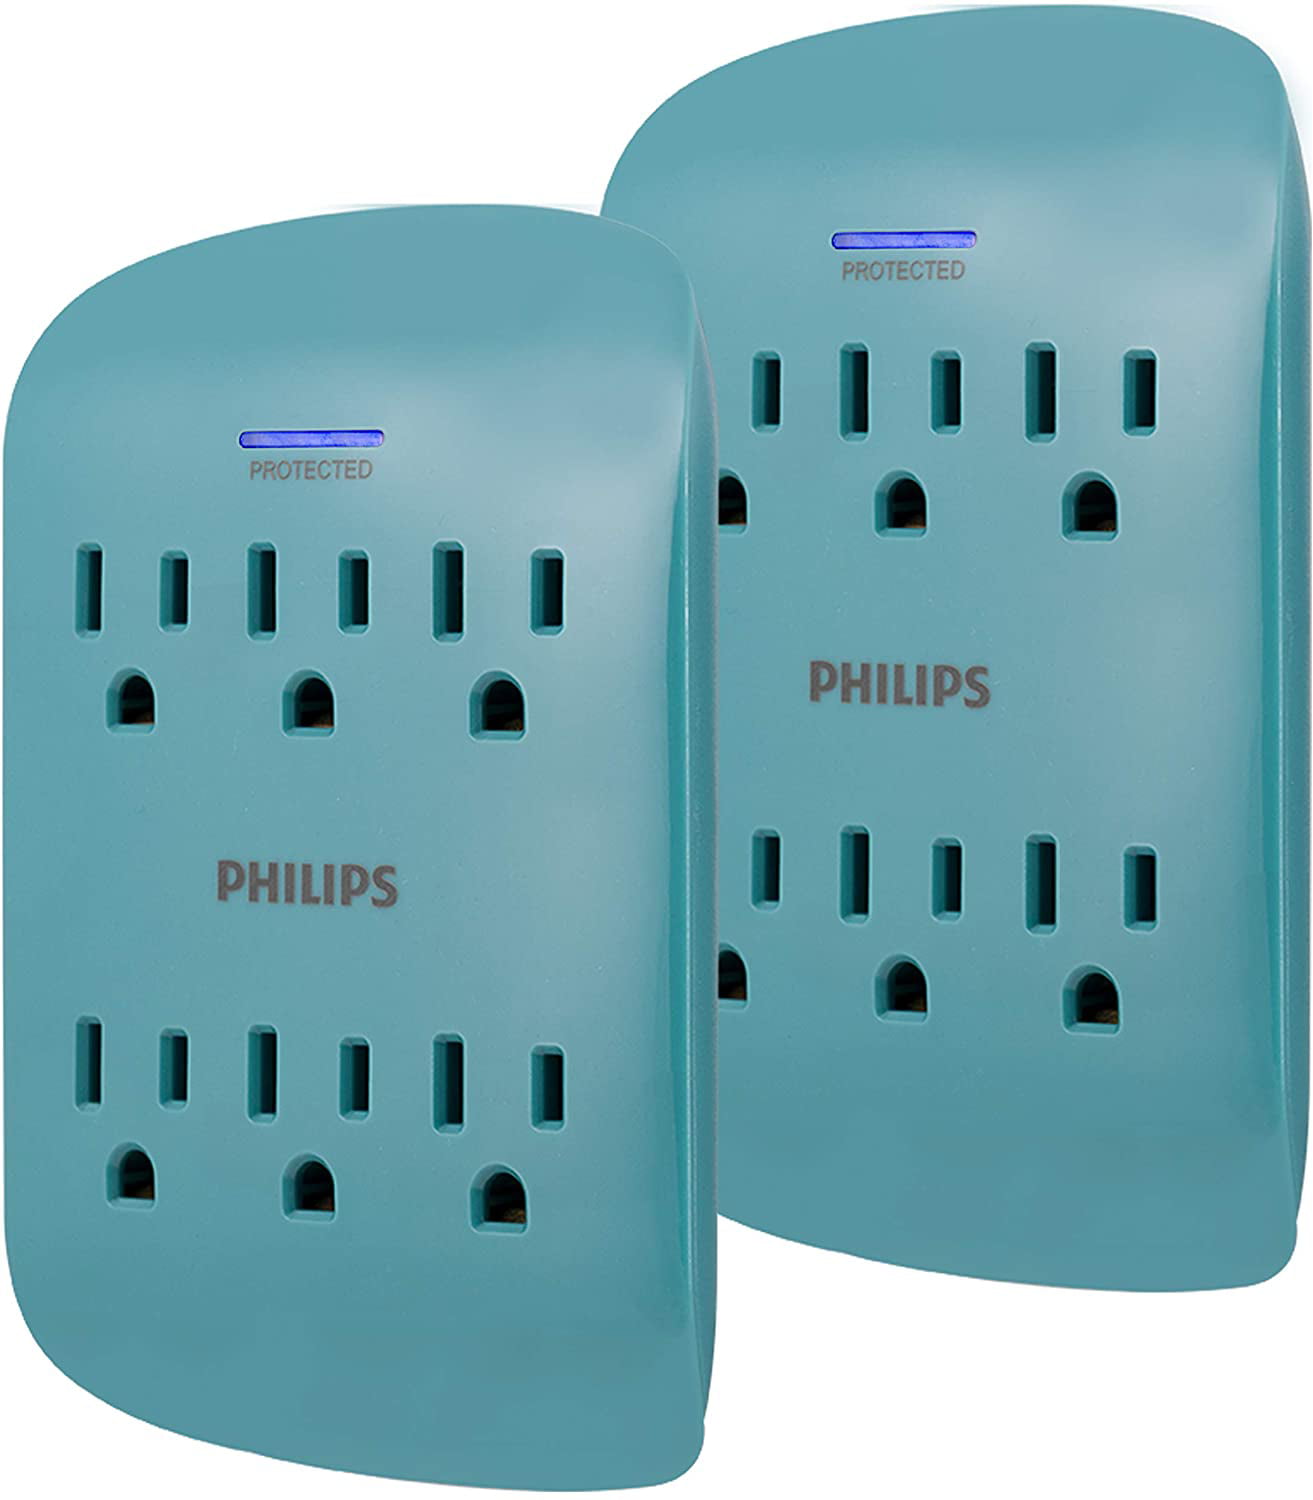 Space Saving Design Philips 6-Outlet Extender Surge Protector 3-Prong Grey 900 Joules SPP3469GR/37 4 Pack Protection Indicator LED Light 